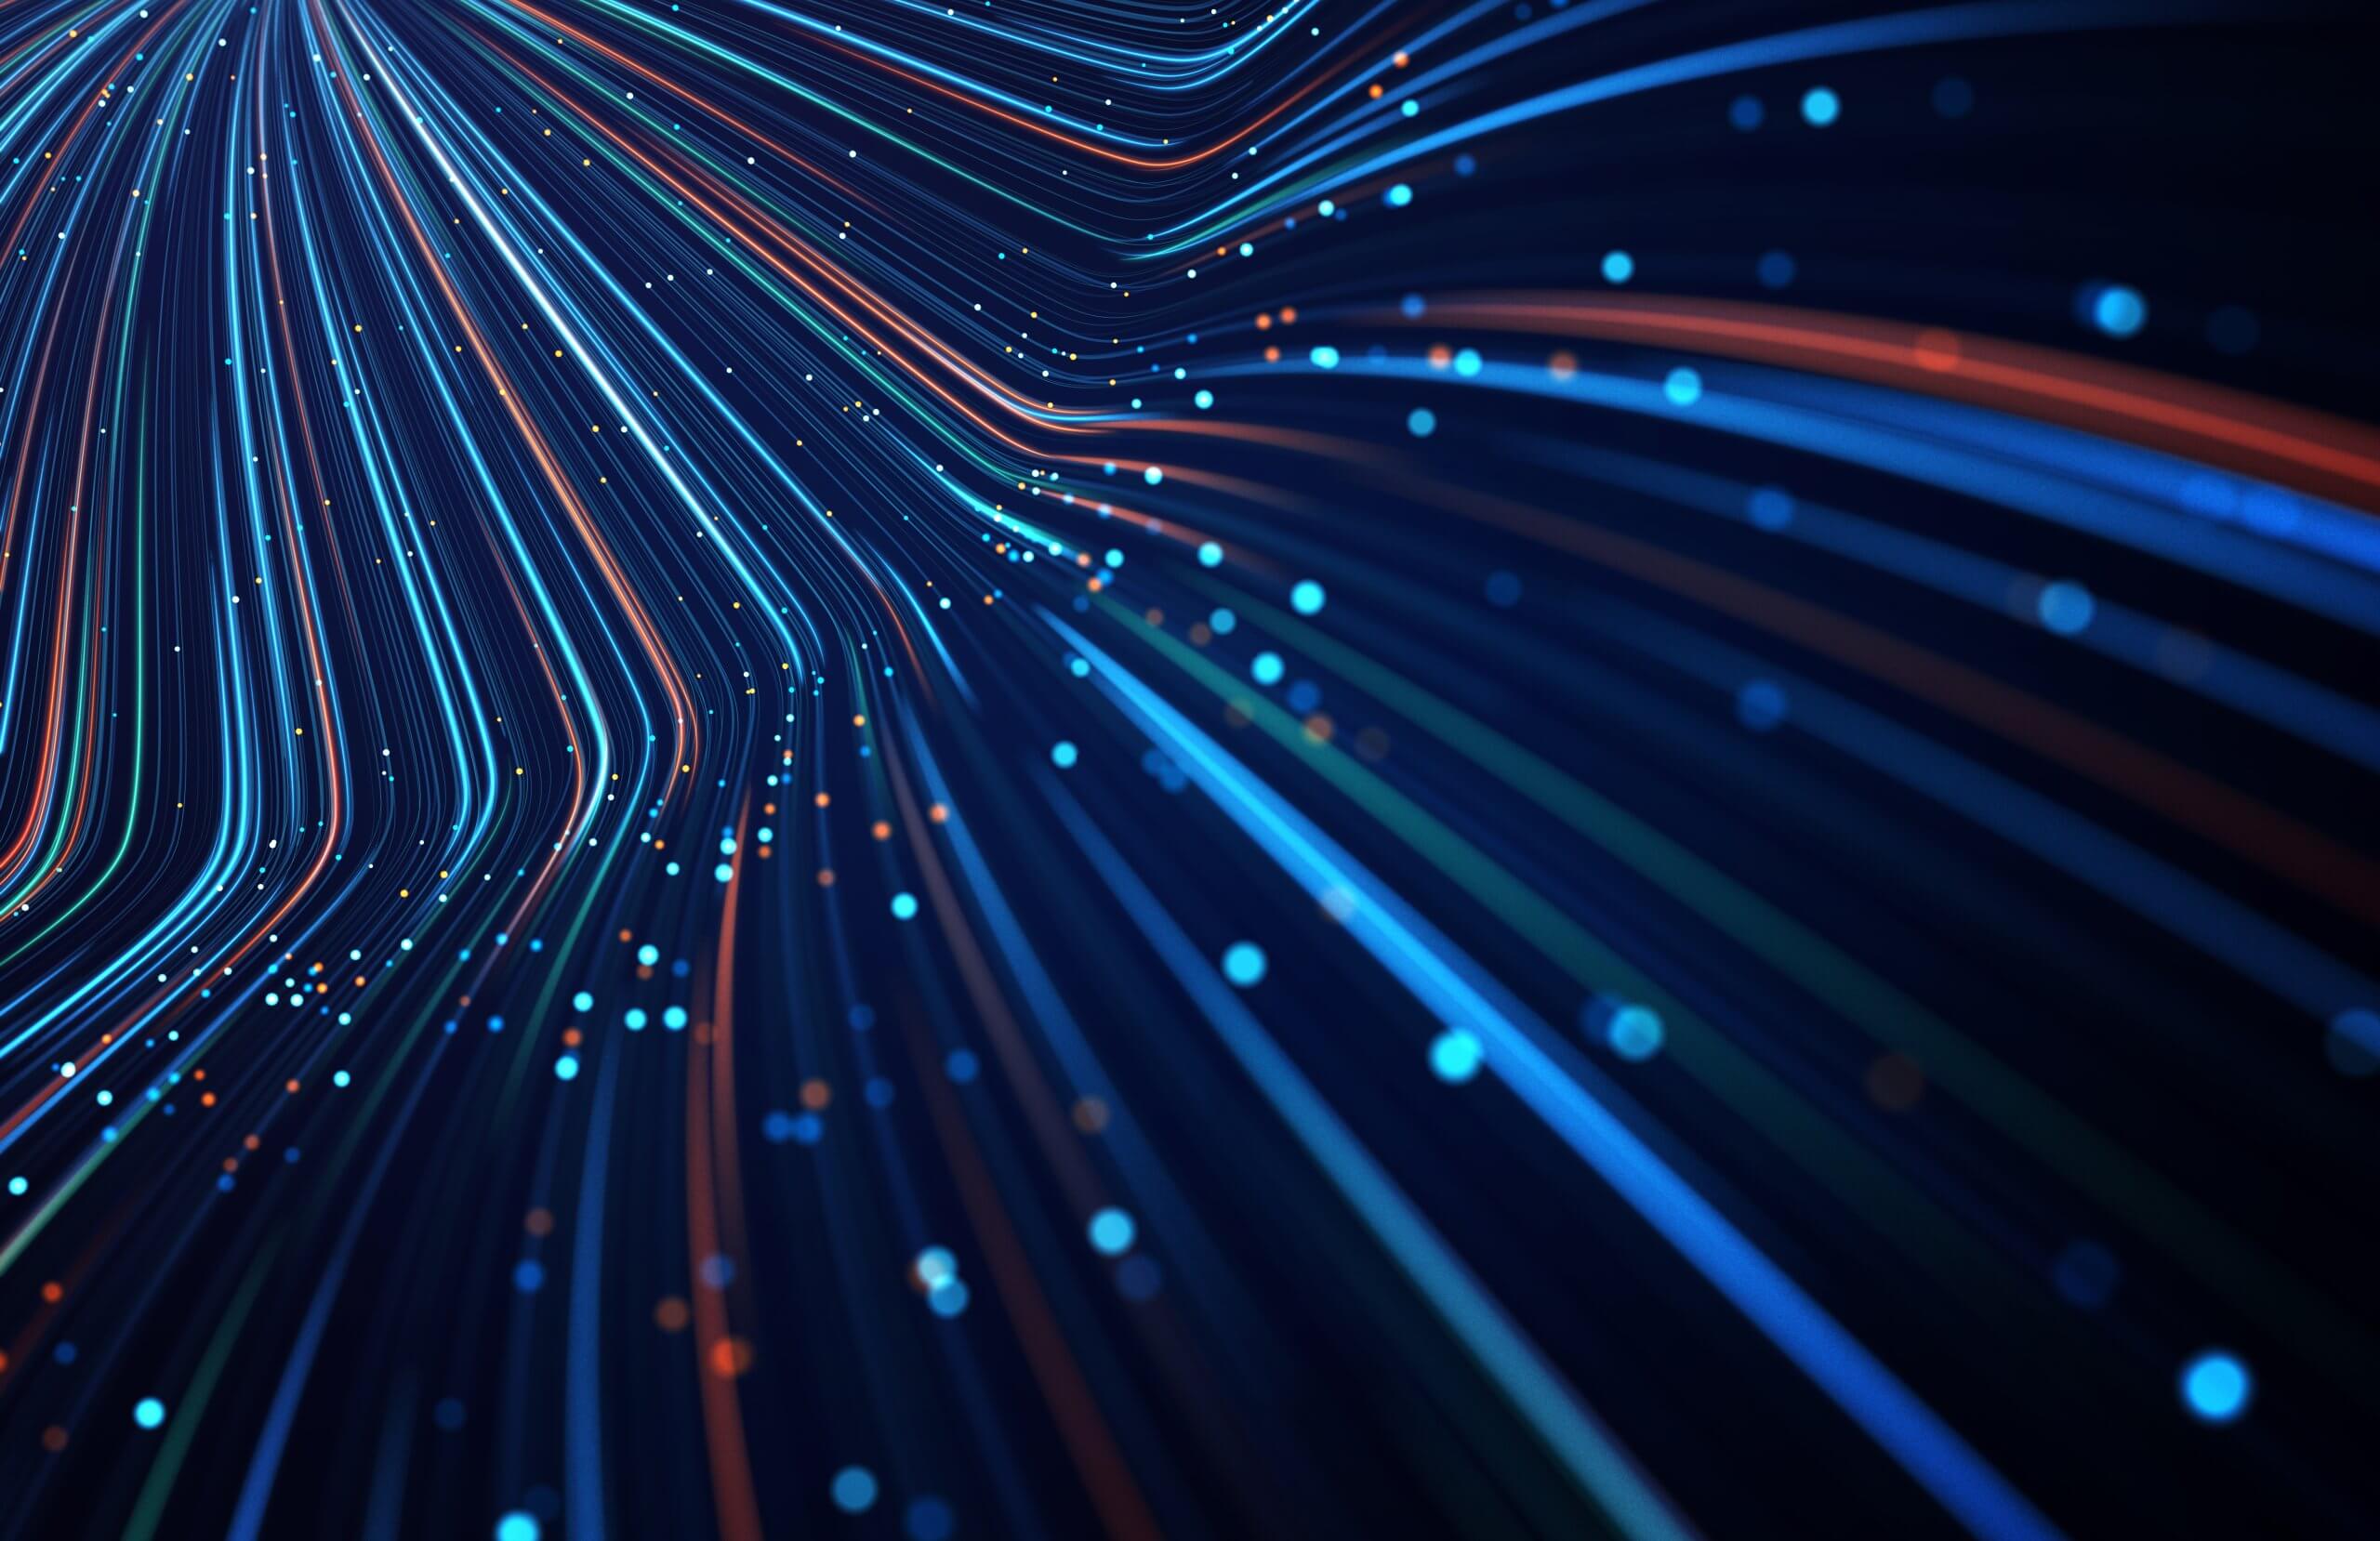 Digital abstract background depicting blue and orange light streaks converging into a vanishing point with glowing particles.